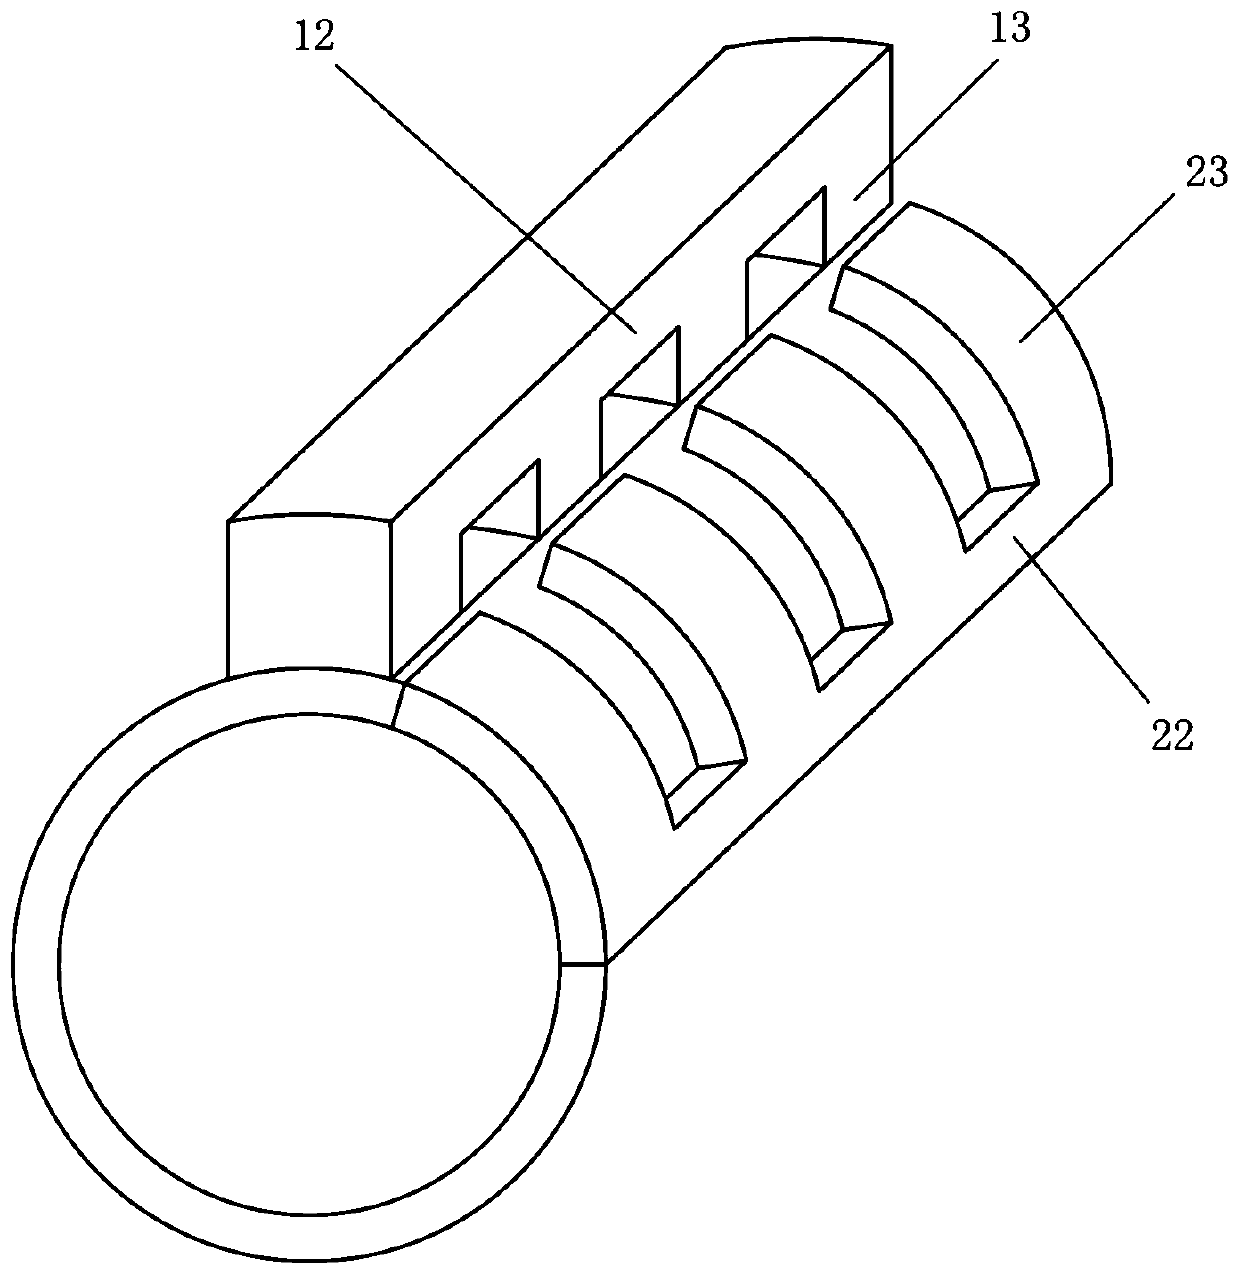 Switched reluctance motor including u-shaped rotor pole structure